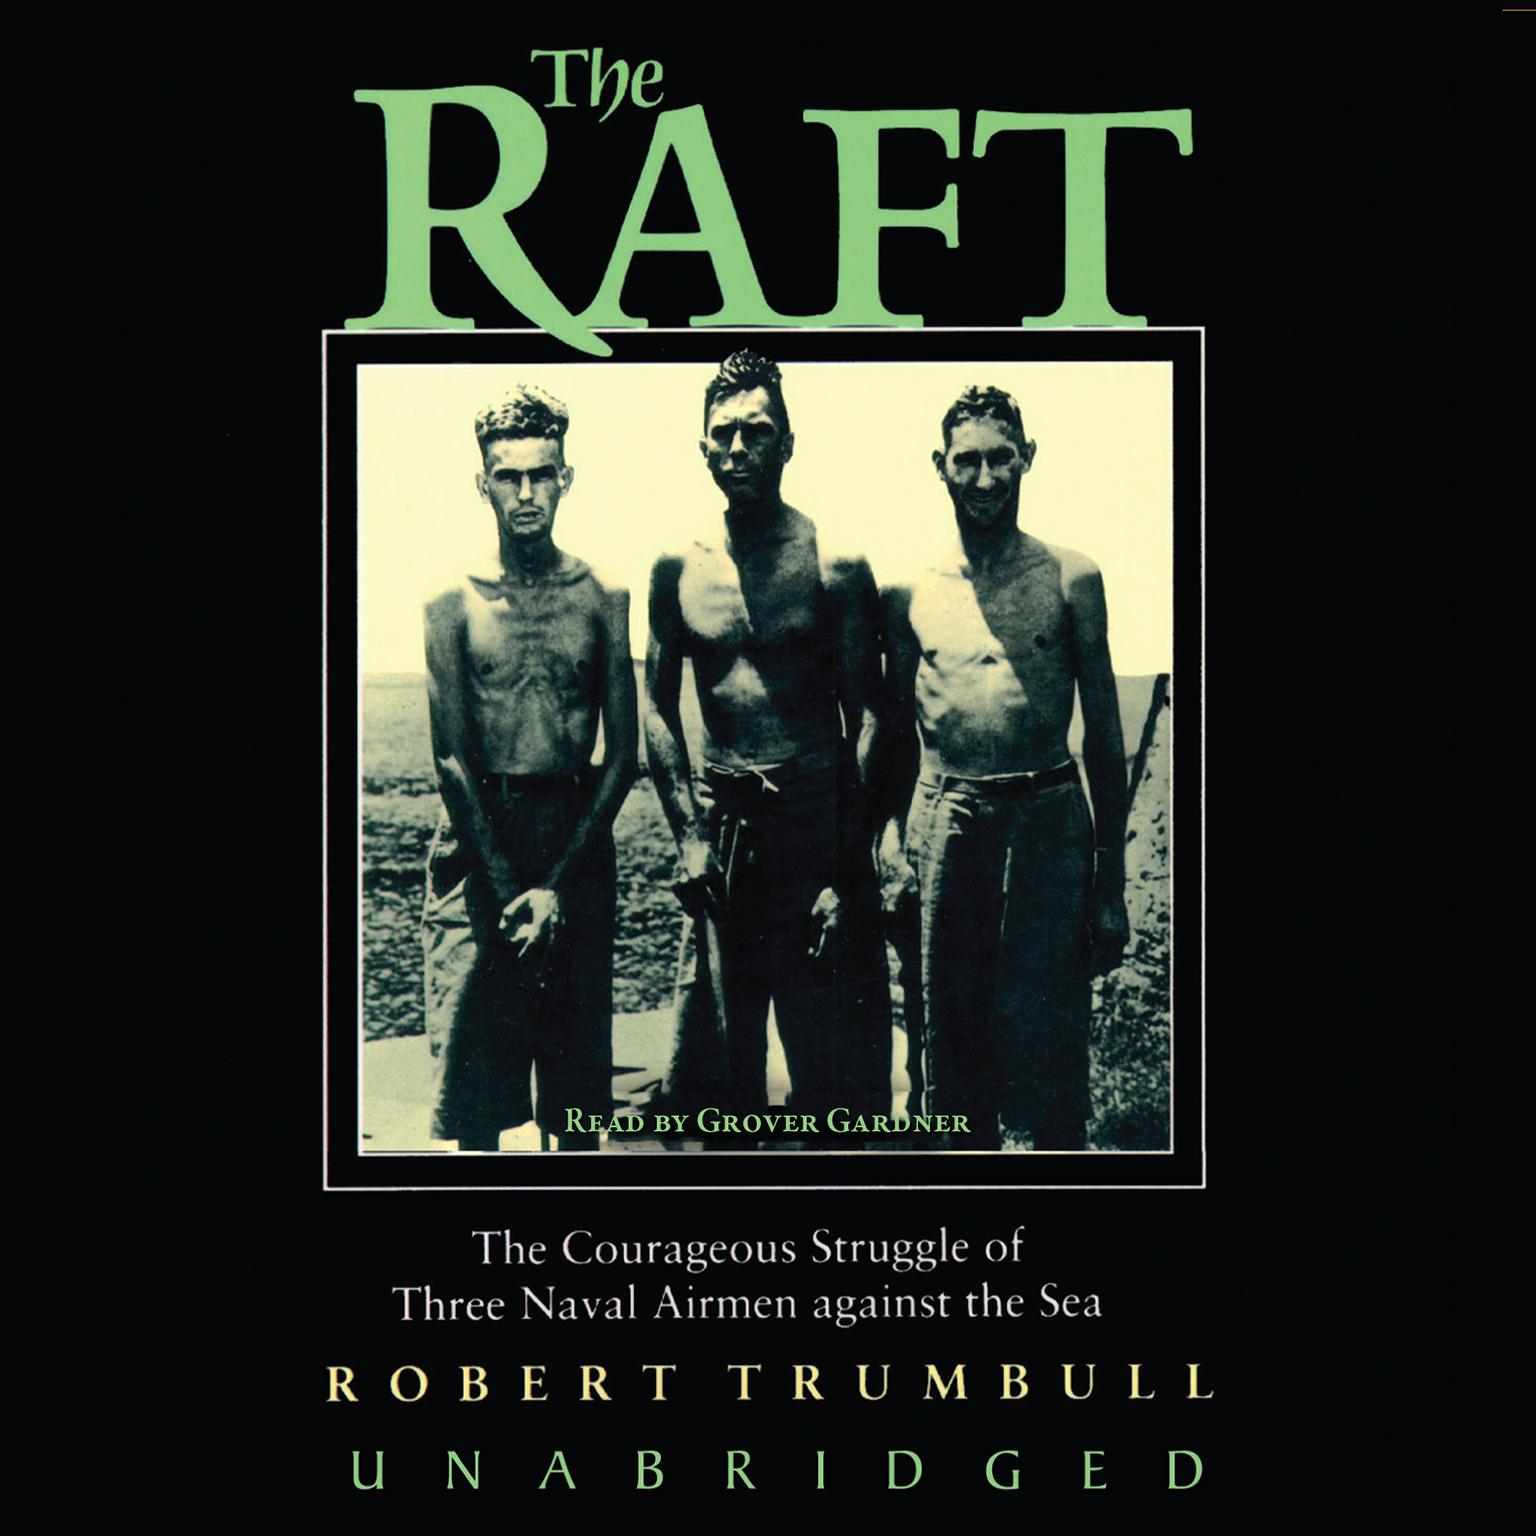 The Raft: The Courageous Struggle of Three Naval Airmen against the Sea Audiobook, by Robert Trumbull